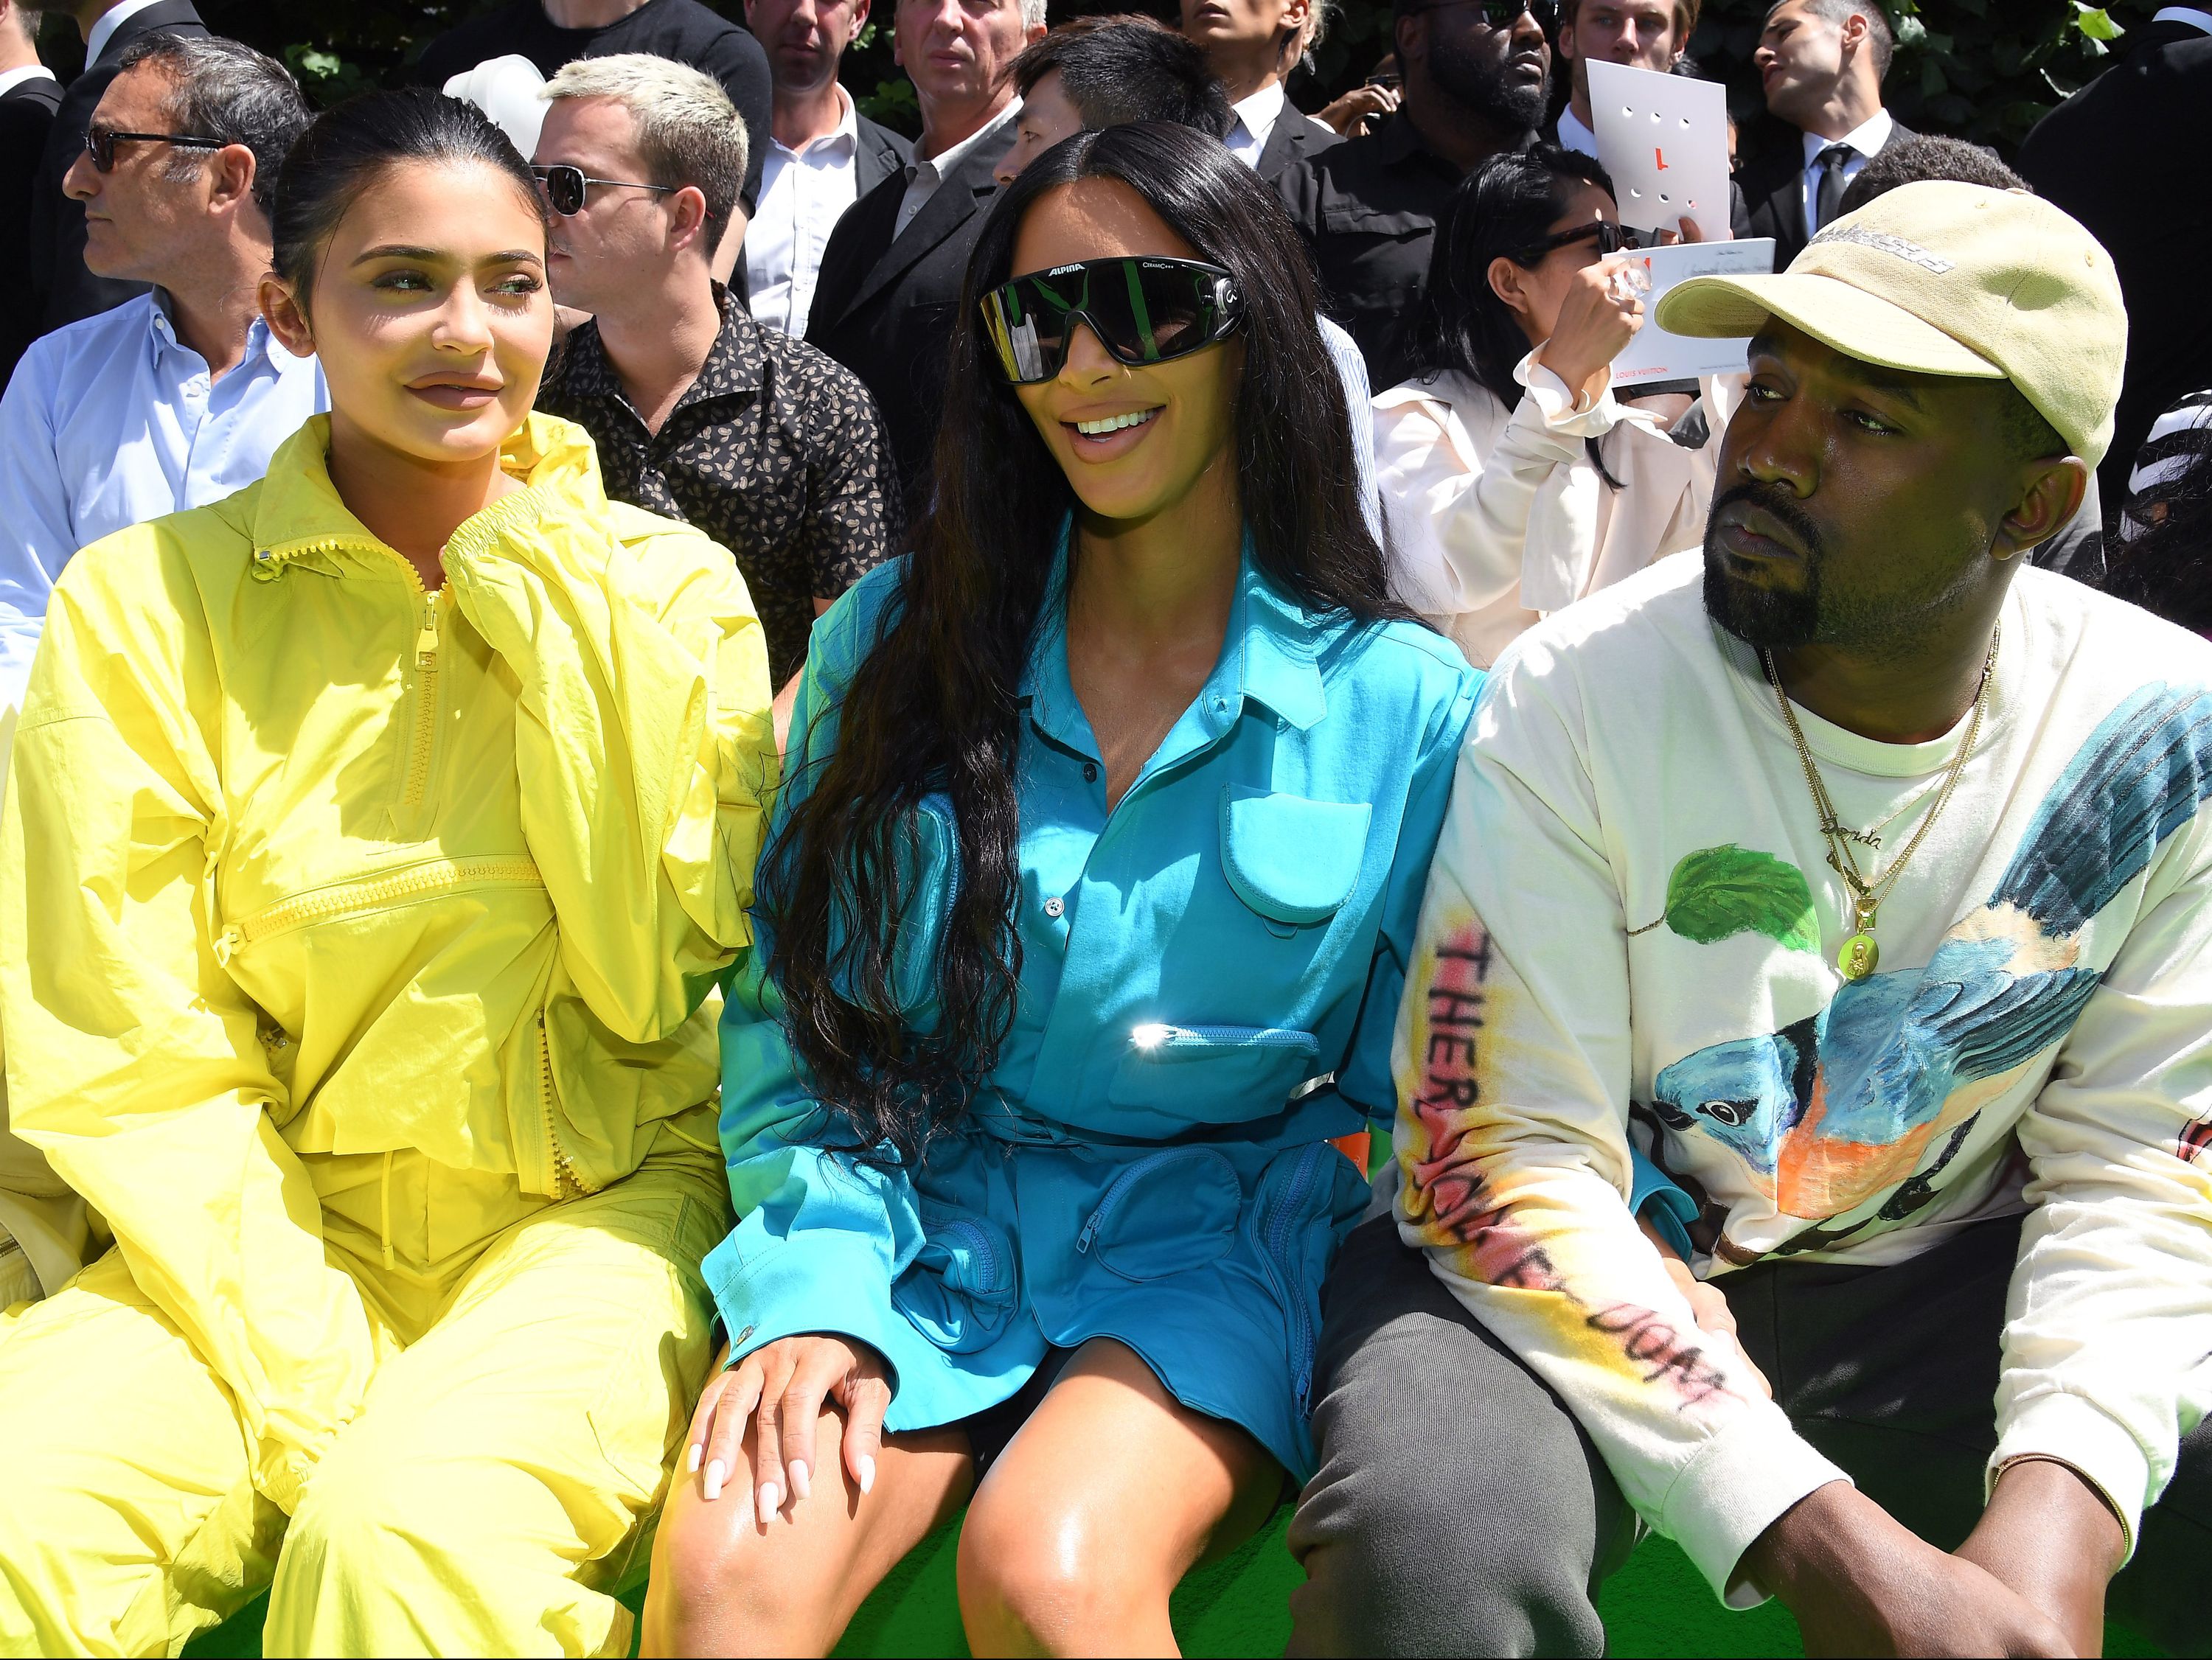 Virgil Abloh & Kanye West Embrace in the Front Row at Louis